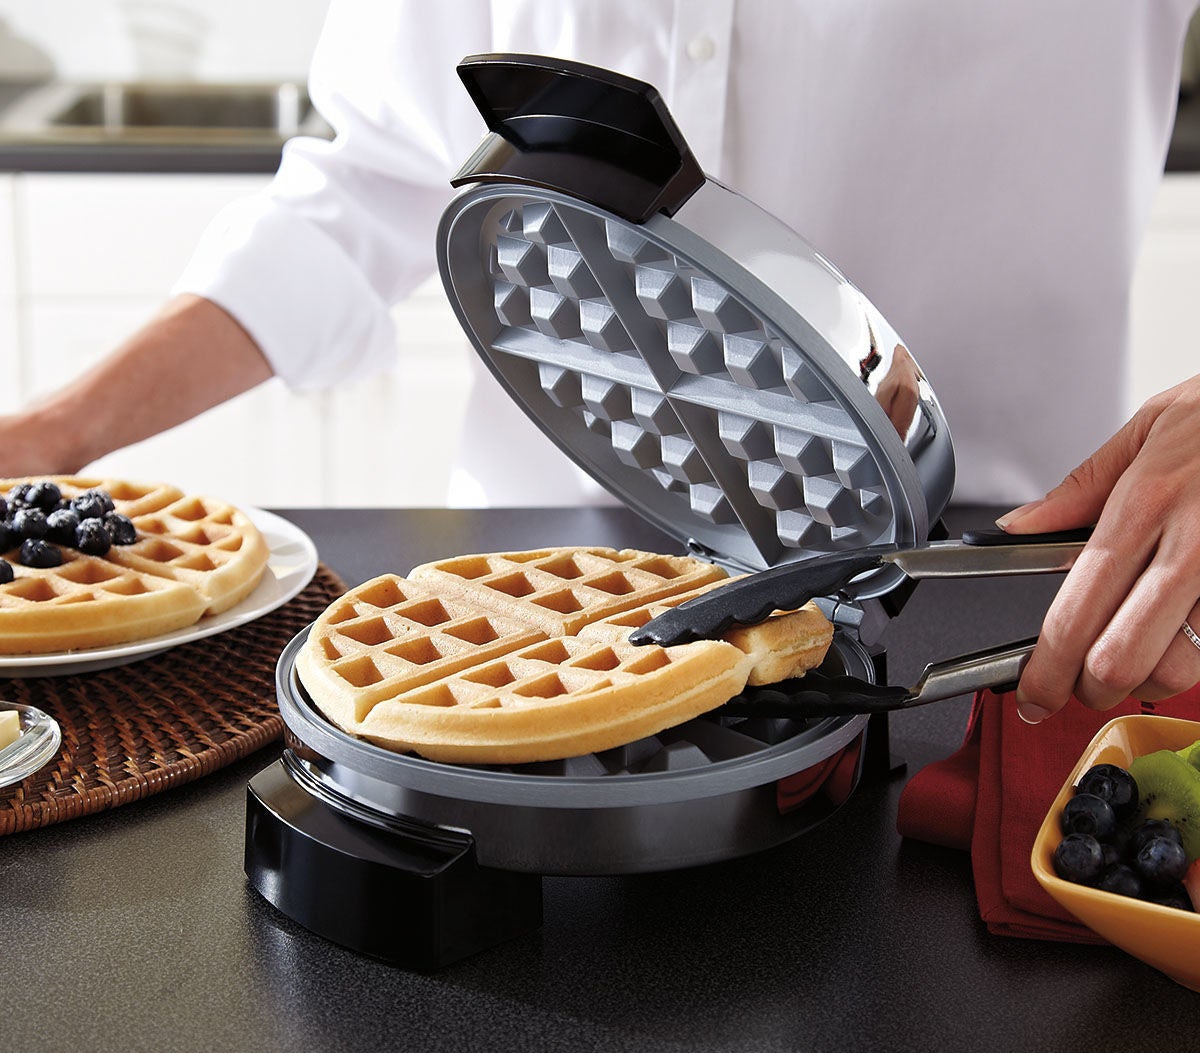 a freshly made waffle being removed from the waffle maker